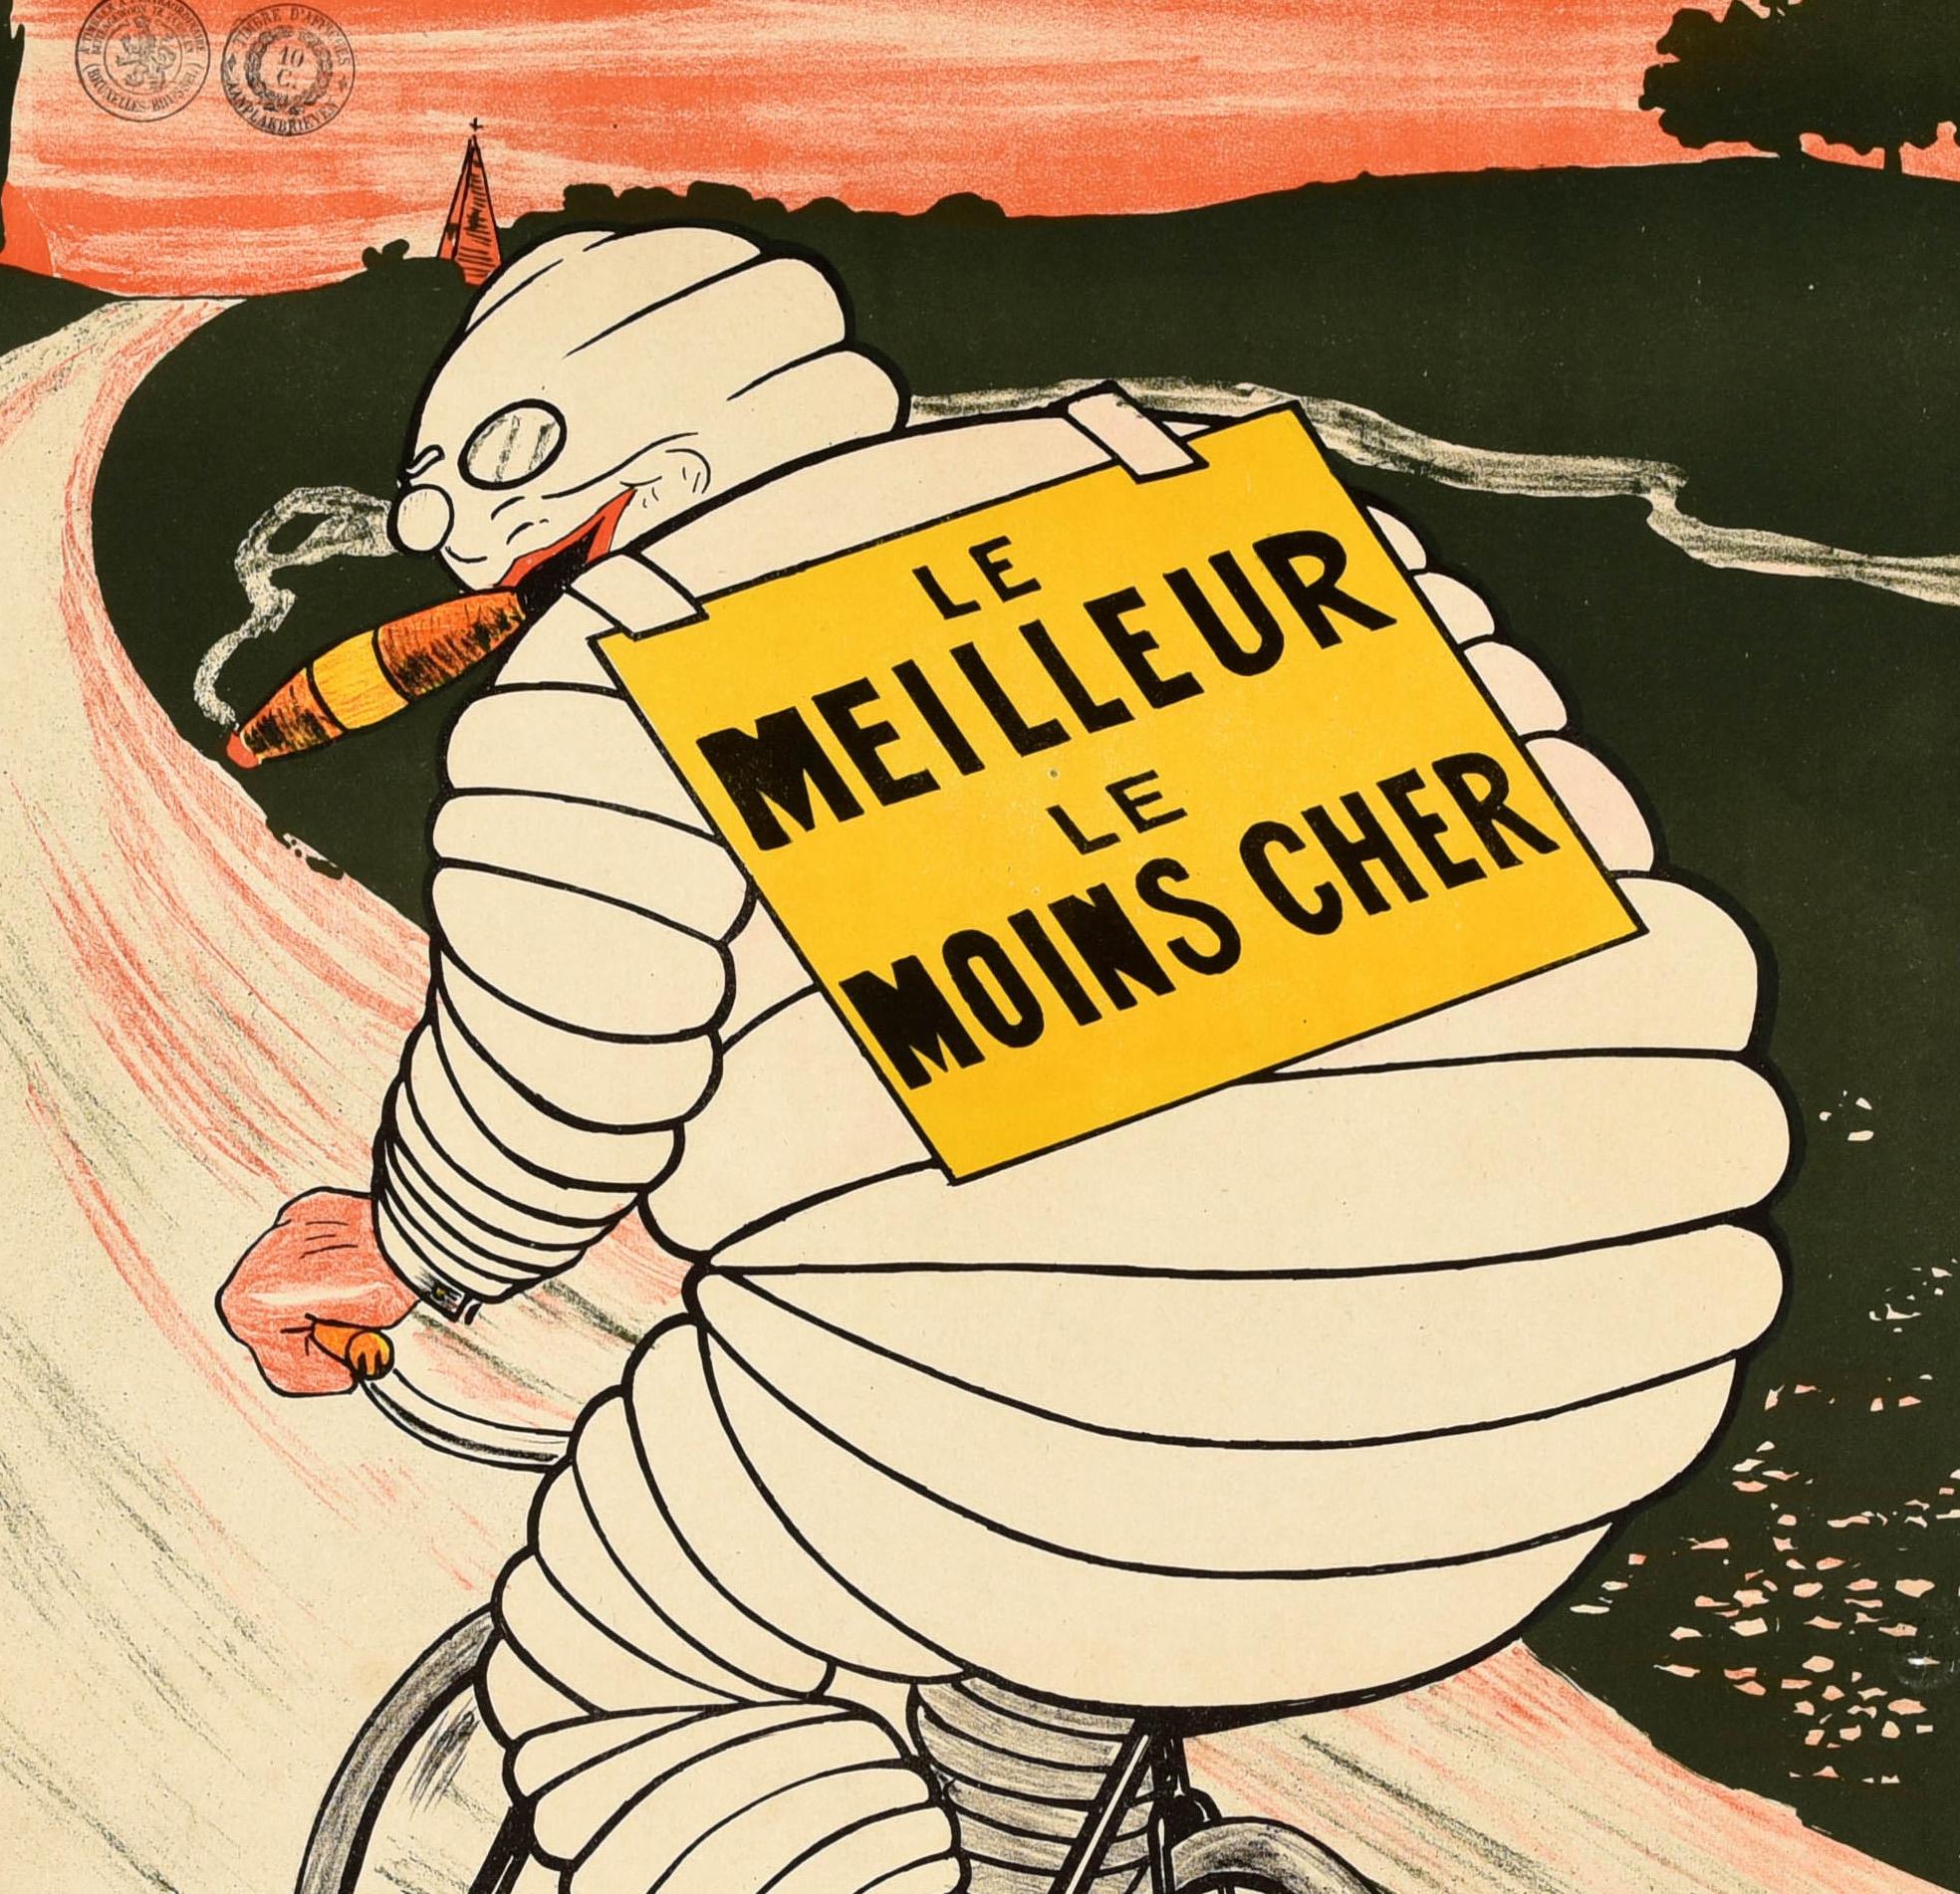 Original antique advertising poster for Michelin tyres featuring a great illustration showing the trademark Bibendum character - the iconic Michelin Man figure made from tyres - smoking a cigar and riding a bicycle at speed along a country road with